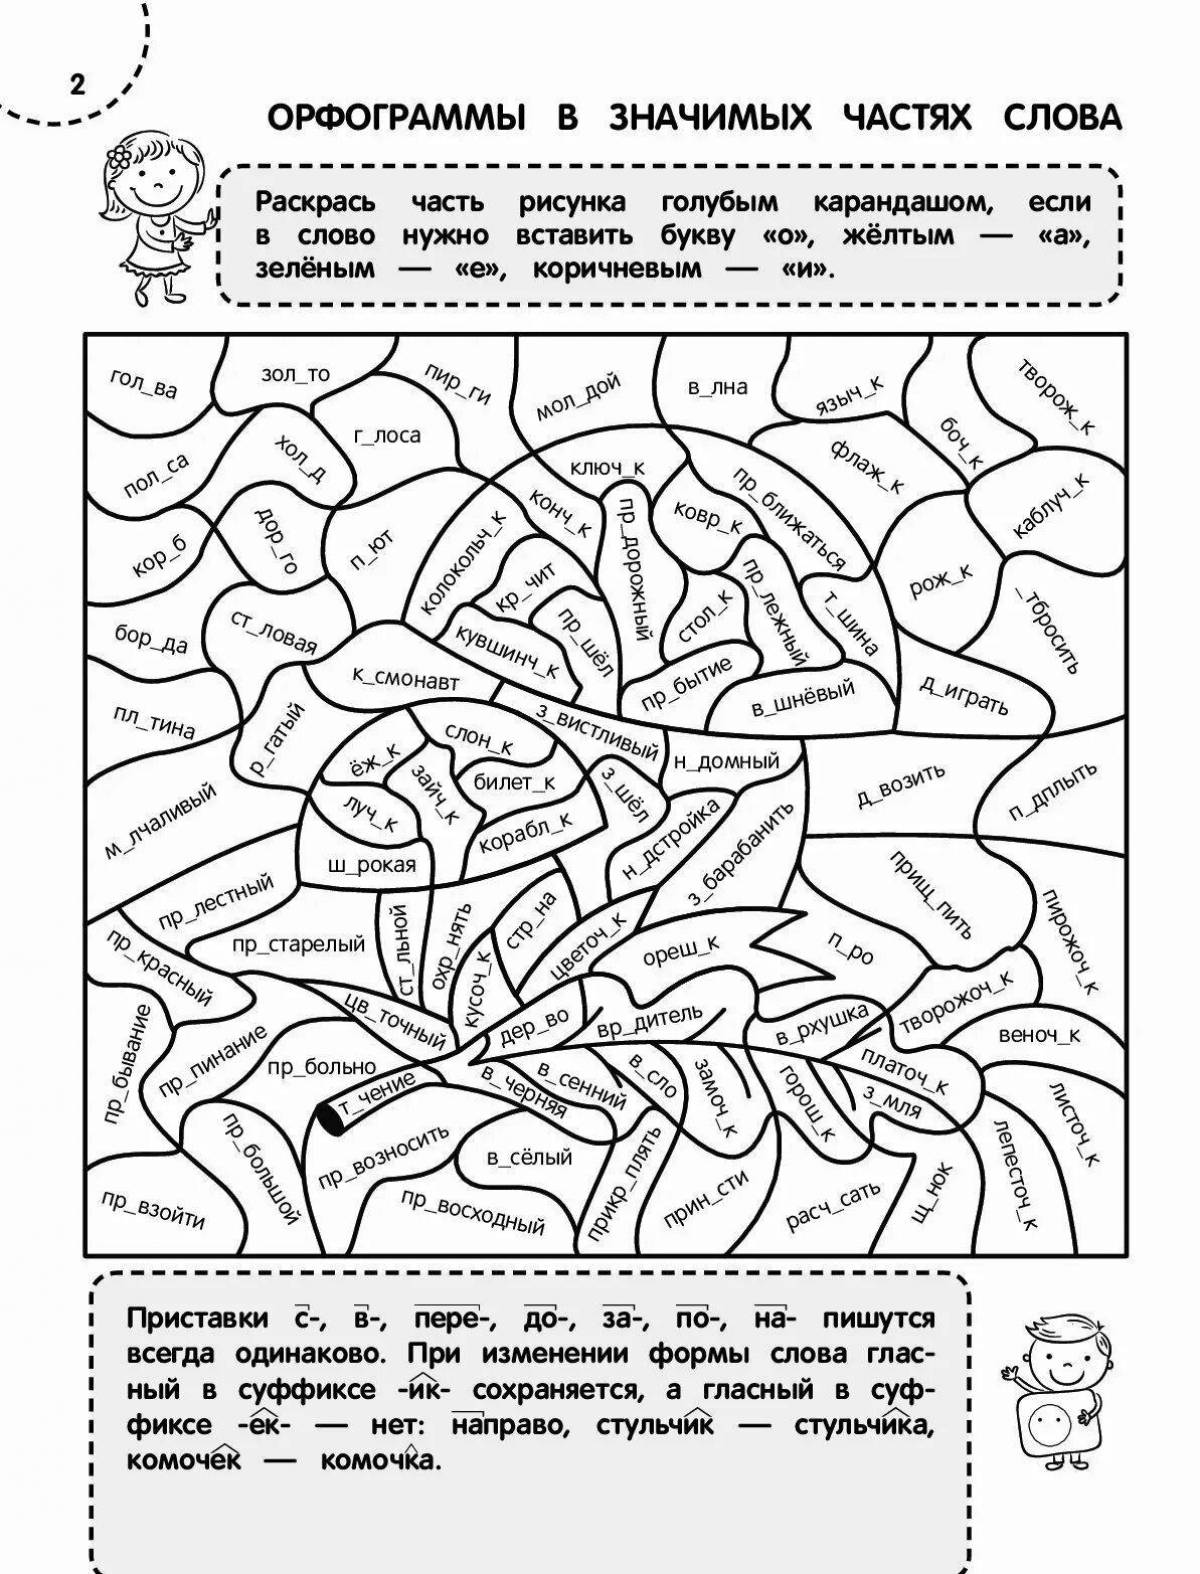 Playful coloring write a simulator without errors Grade 3 answers